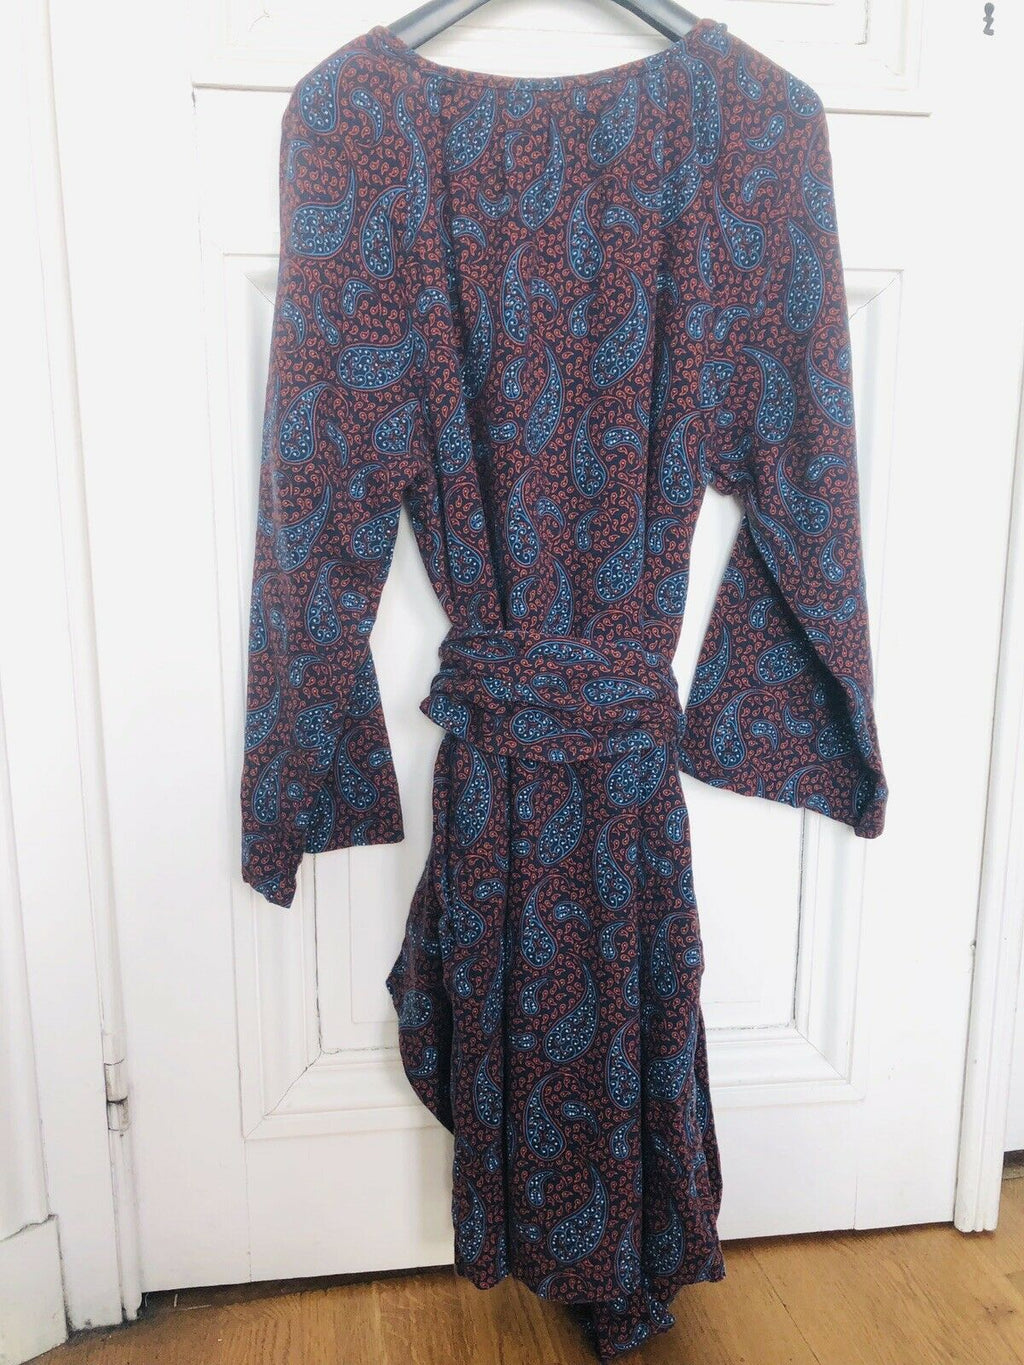 A.P.C. Paisley Belted Dress Size XS